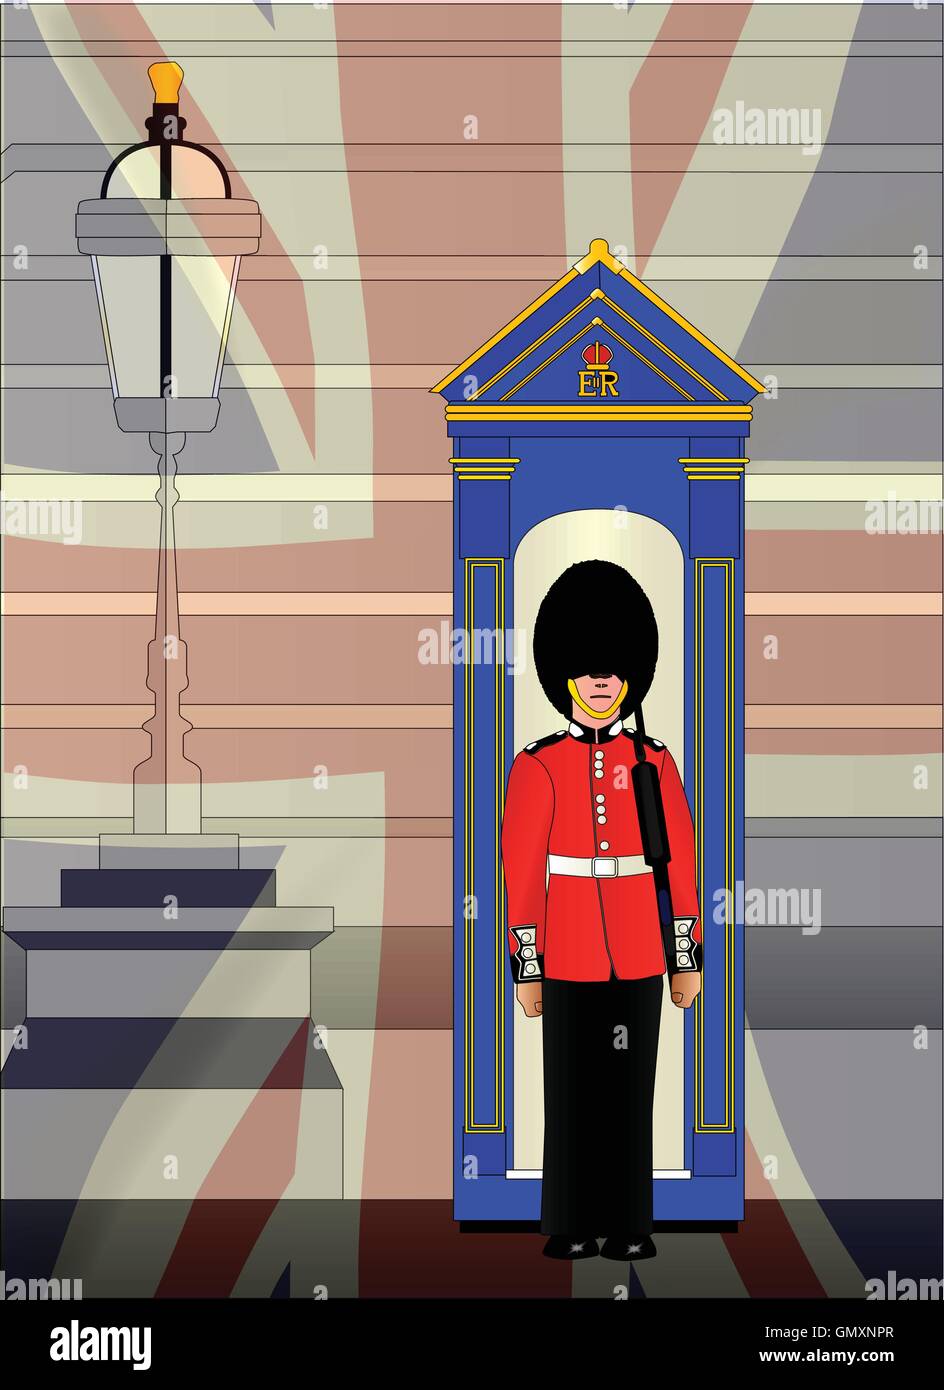 Soldier On Royal Guard Duty Stock Vector